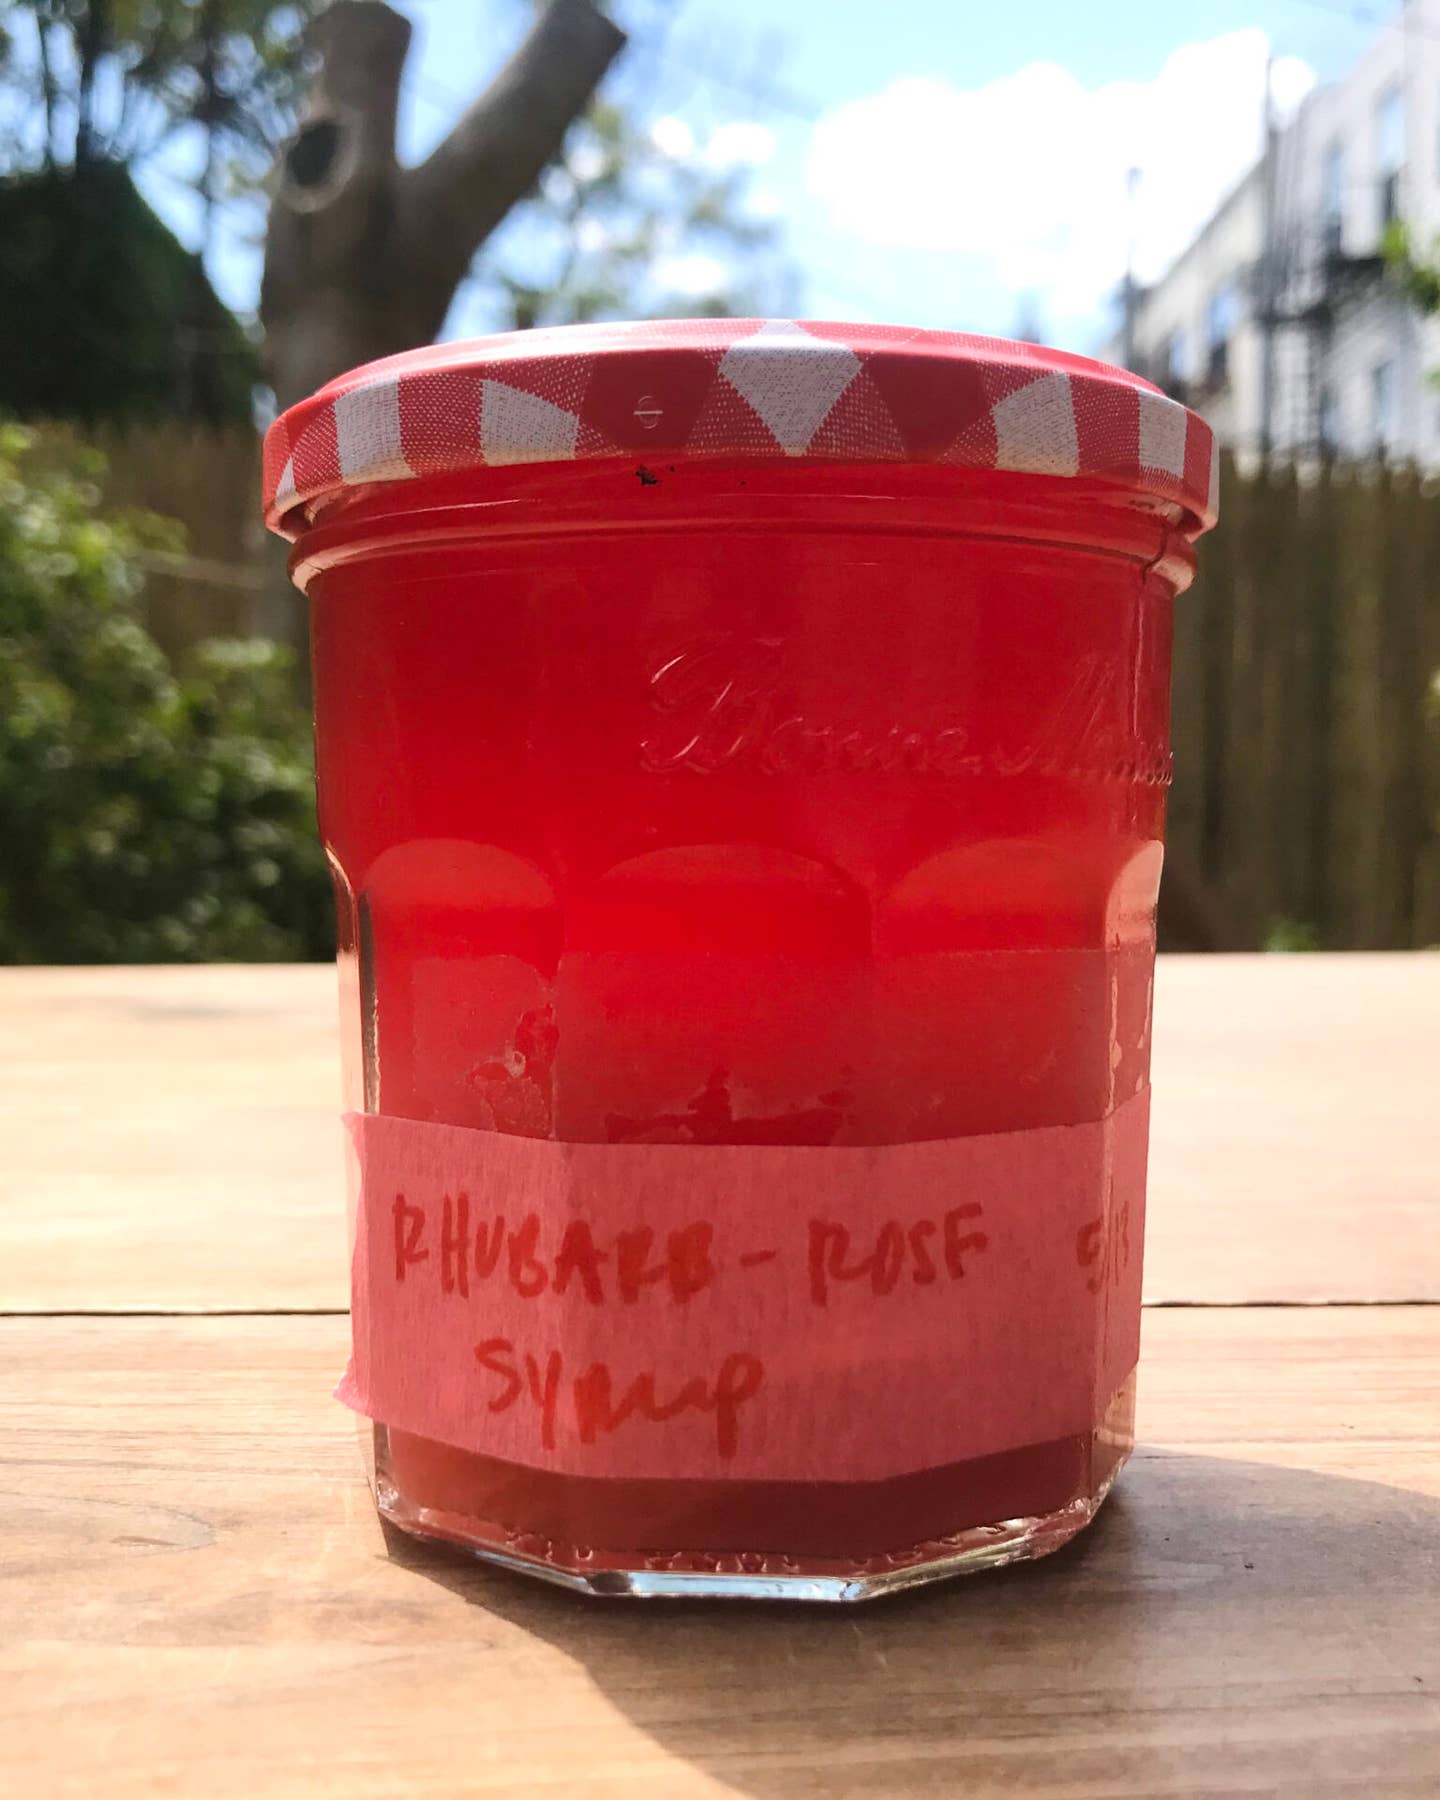 Rhubarb and Rose Syrup